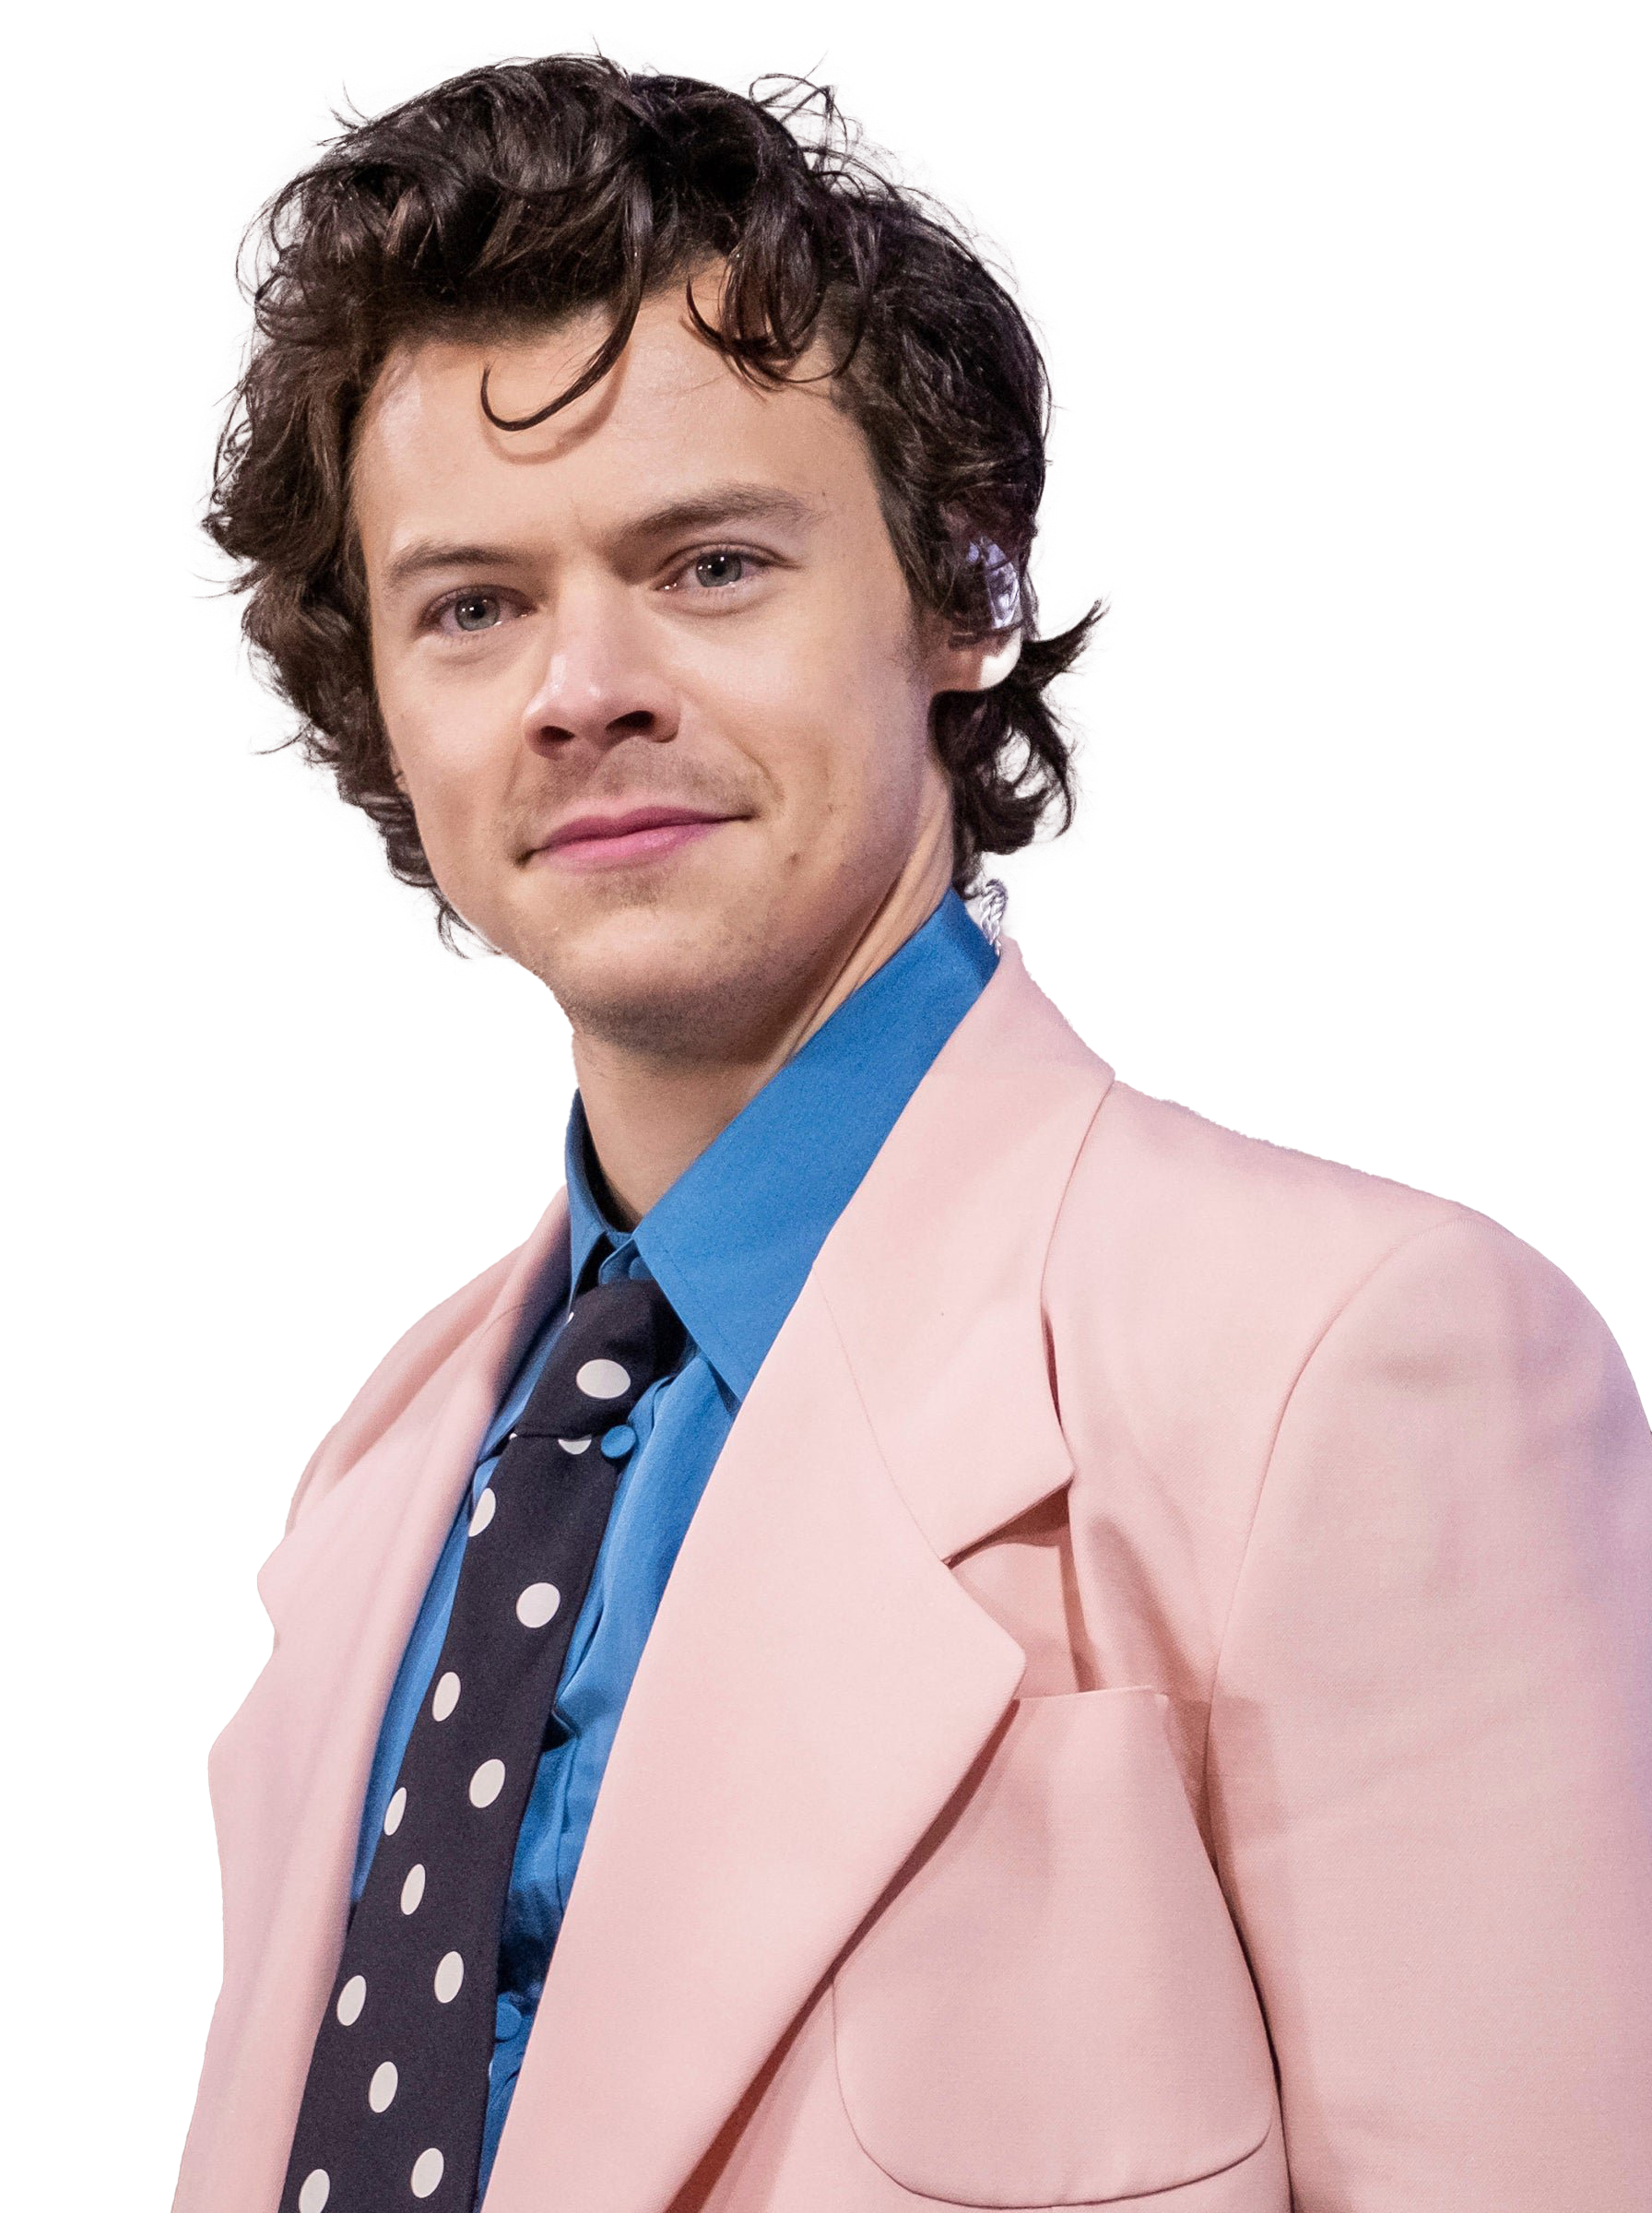 Singer Harry Styles PNG Free Image